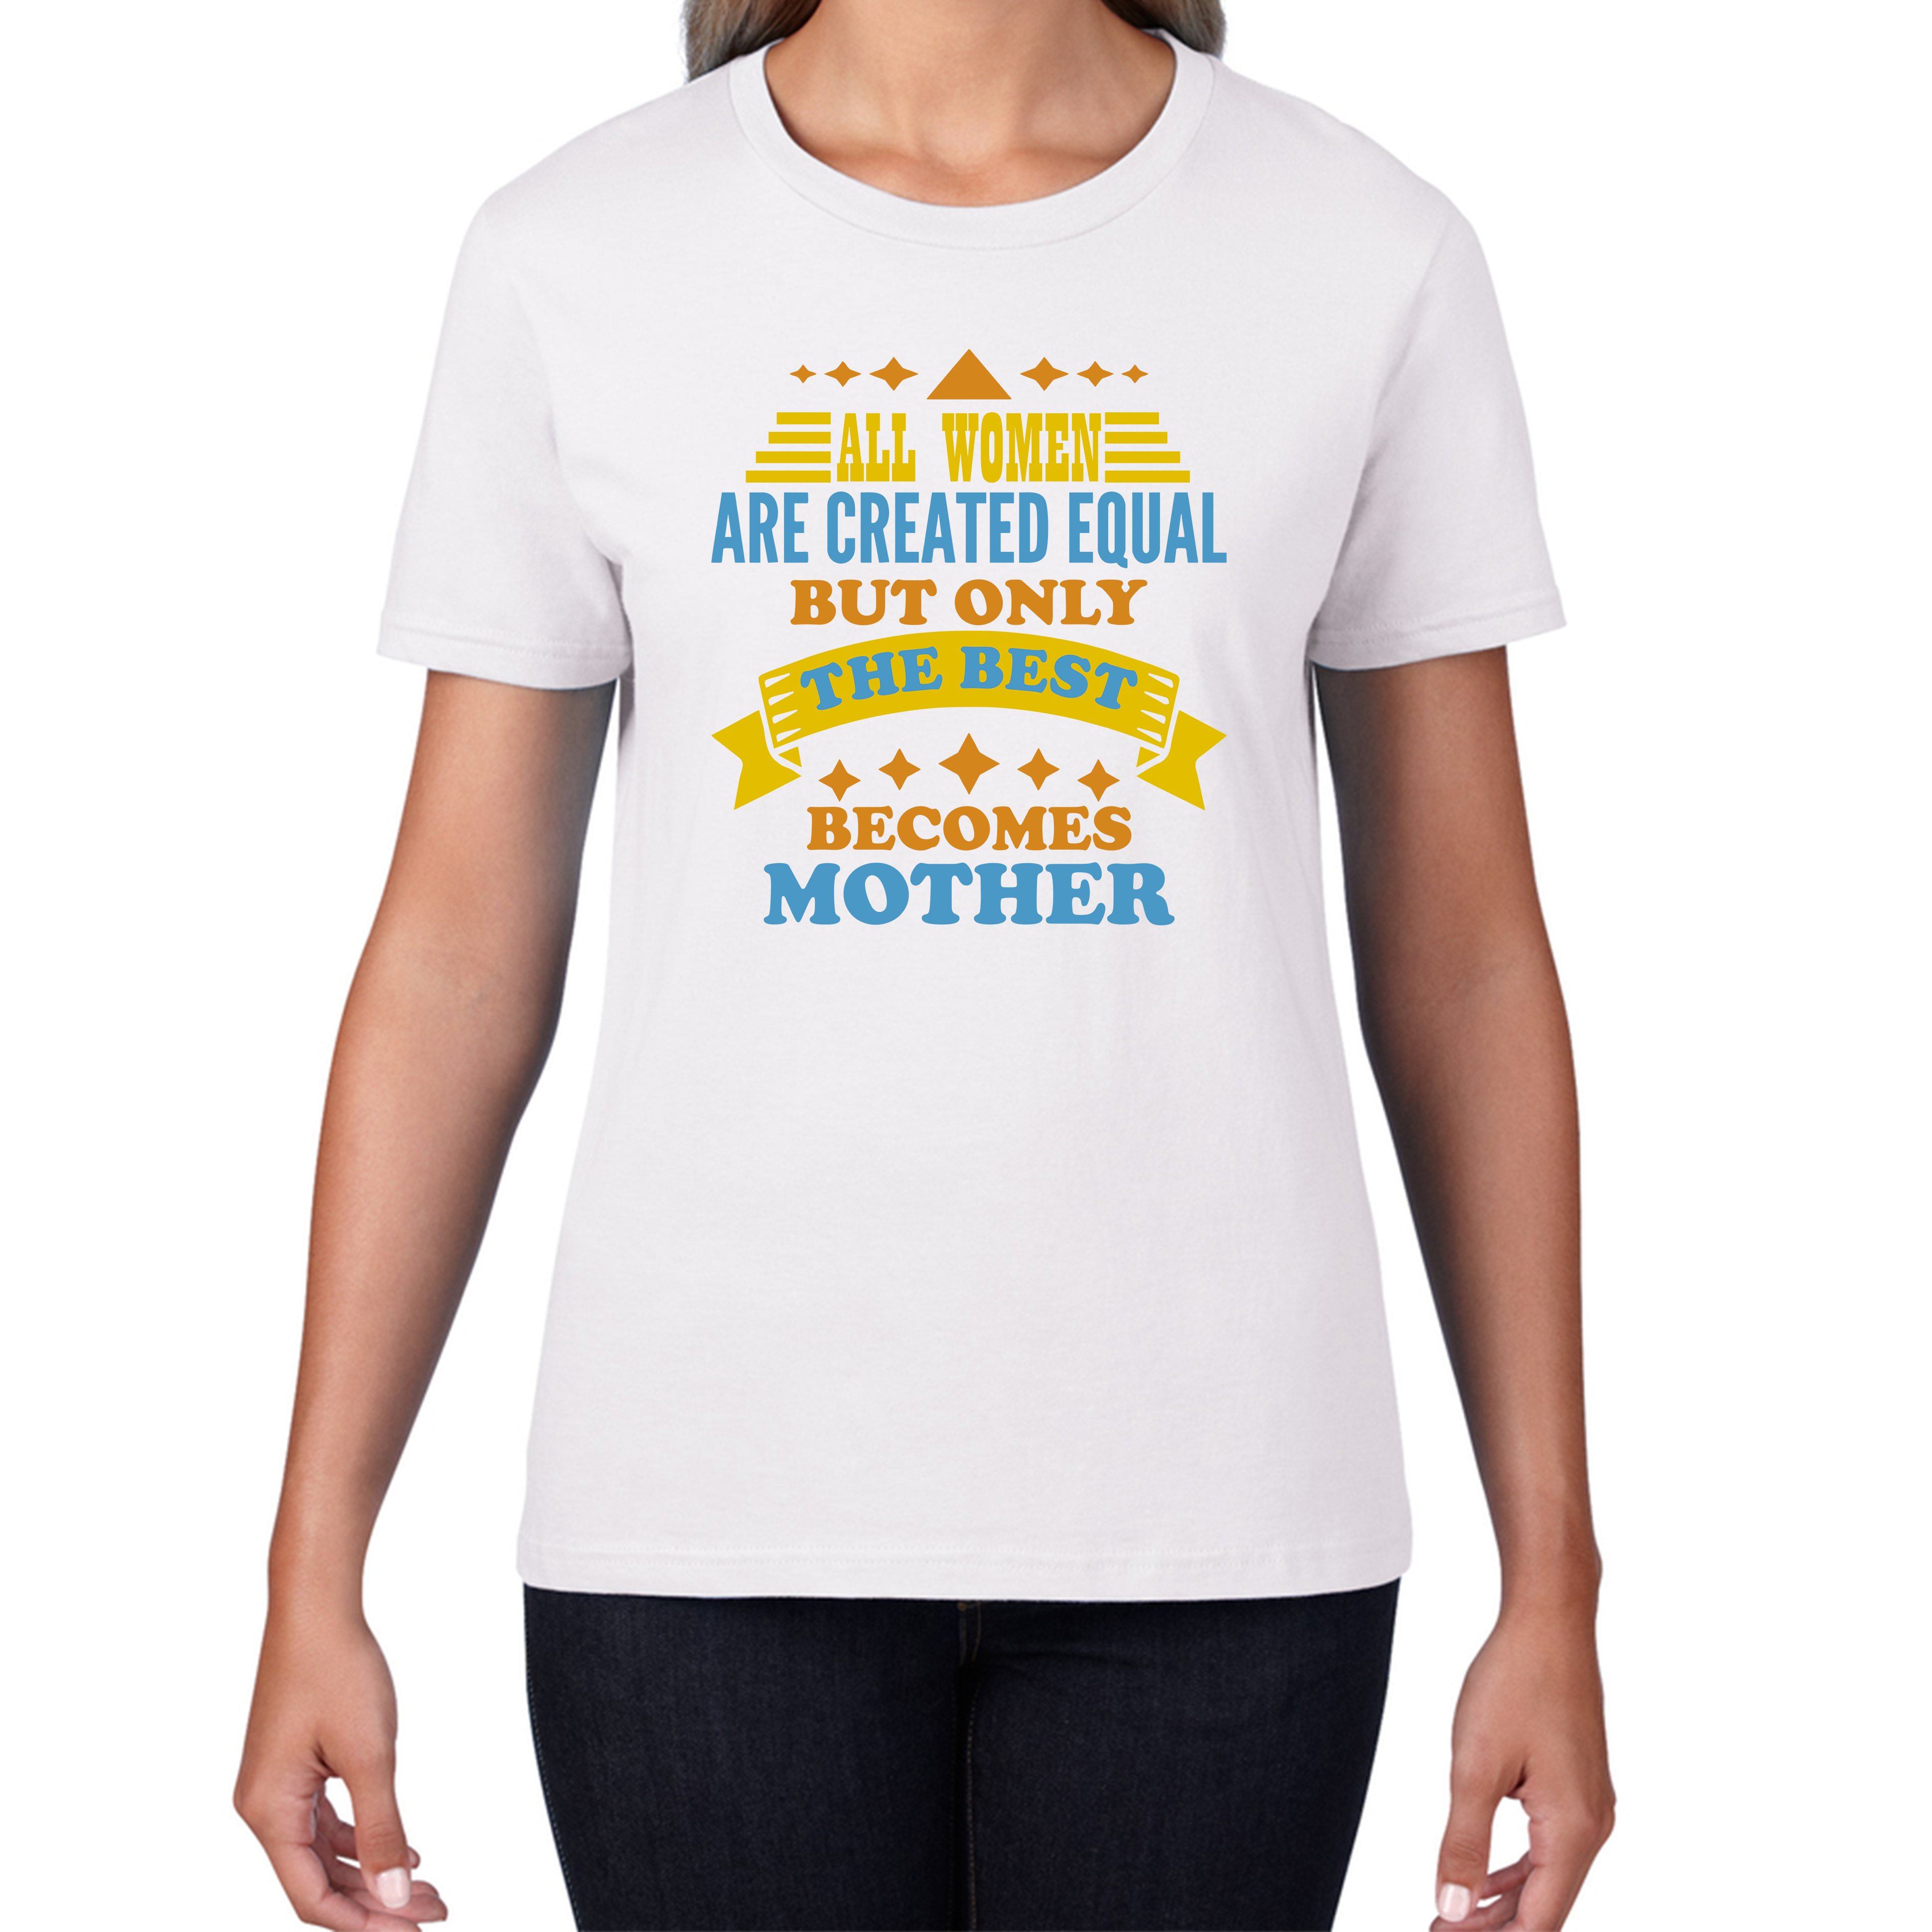 All Women Are Created Equal But Only The Best Becomes Mother Womens Tee Top